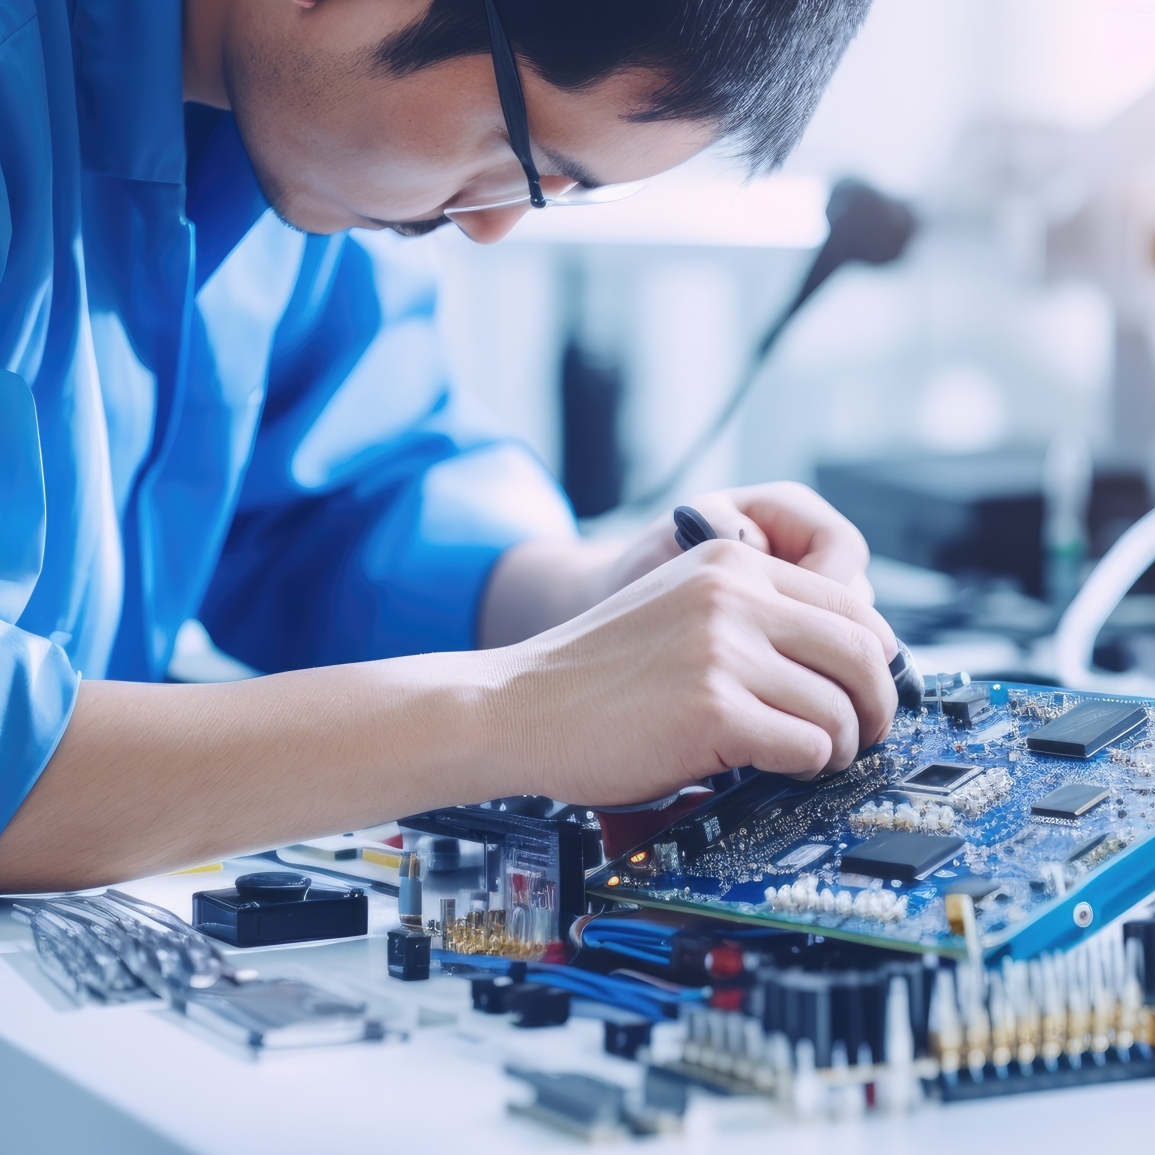 A student works on a motherboard.